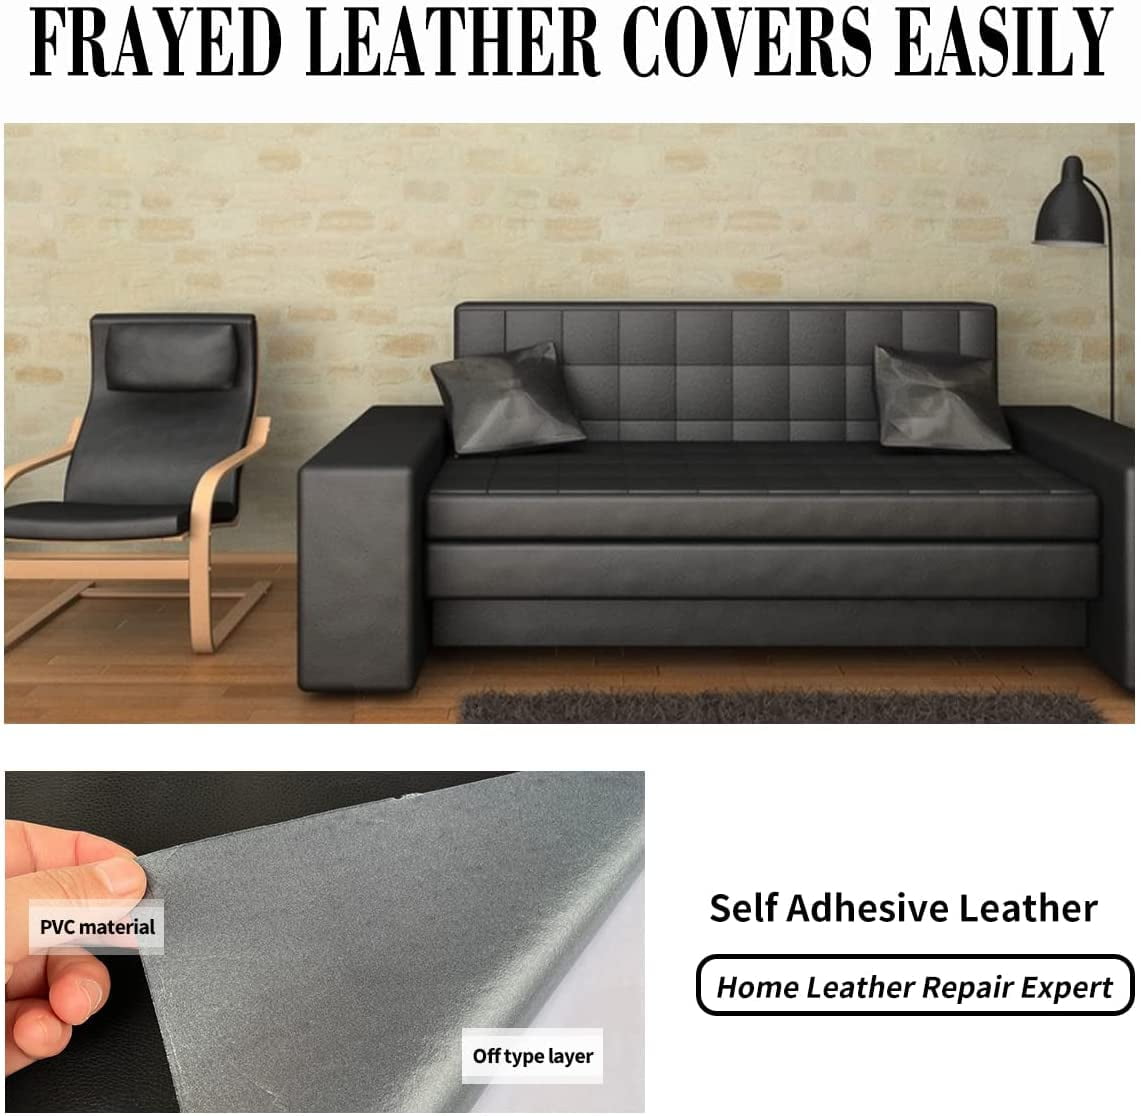 Aousthop Leather Repair Patch Self-Adhesive, 35x137cm / 50x137cm,  Waterproof, DIY Litchi PU Replace Leather Repair Patch for Couches,  Furniture, Kitchen Cabinets, Wall, Jackets, Sofa, Boots(1 Roll) 